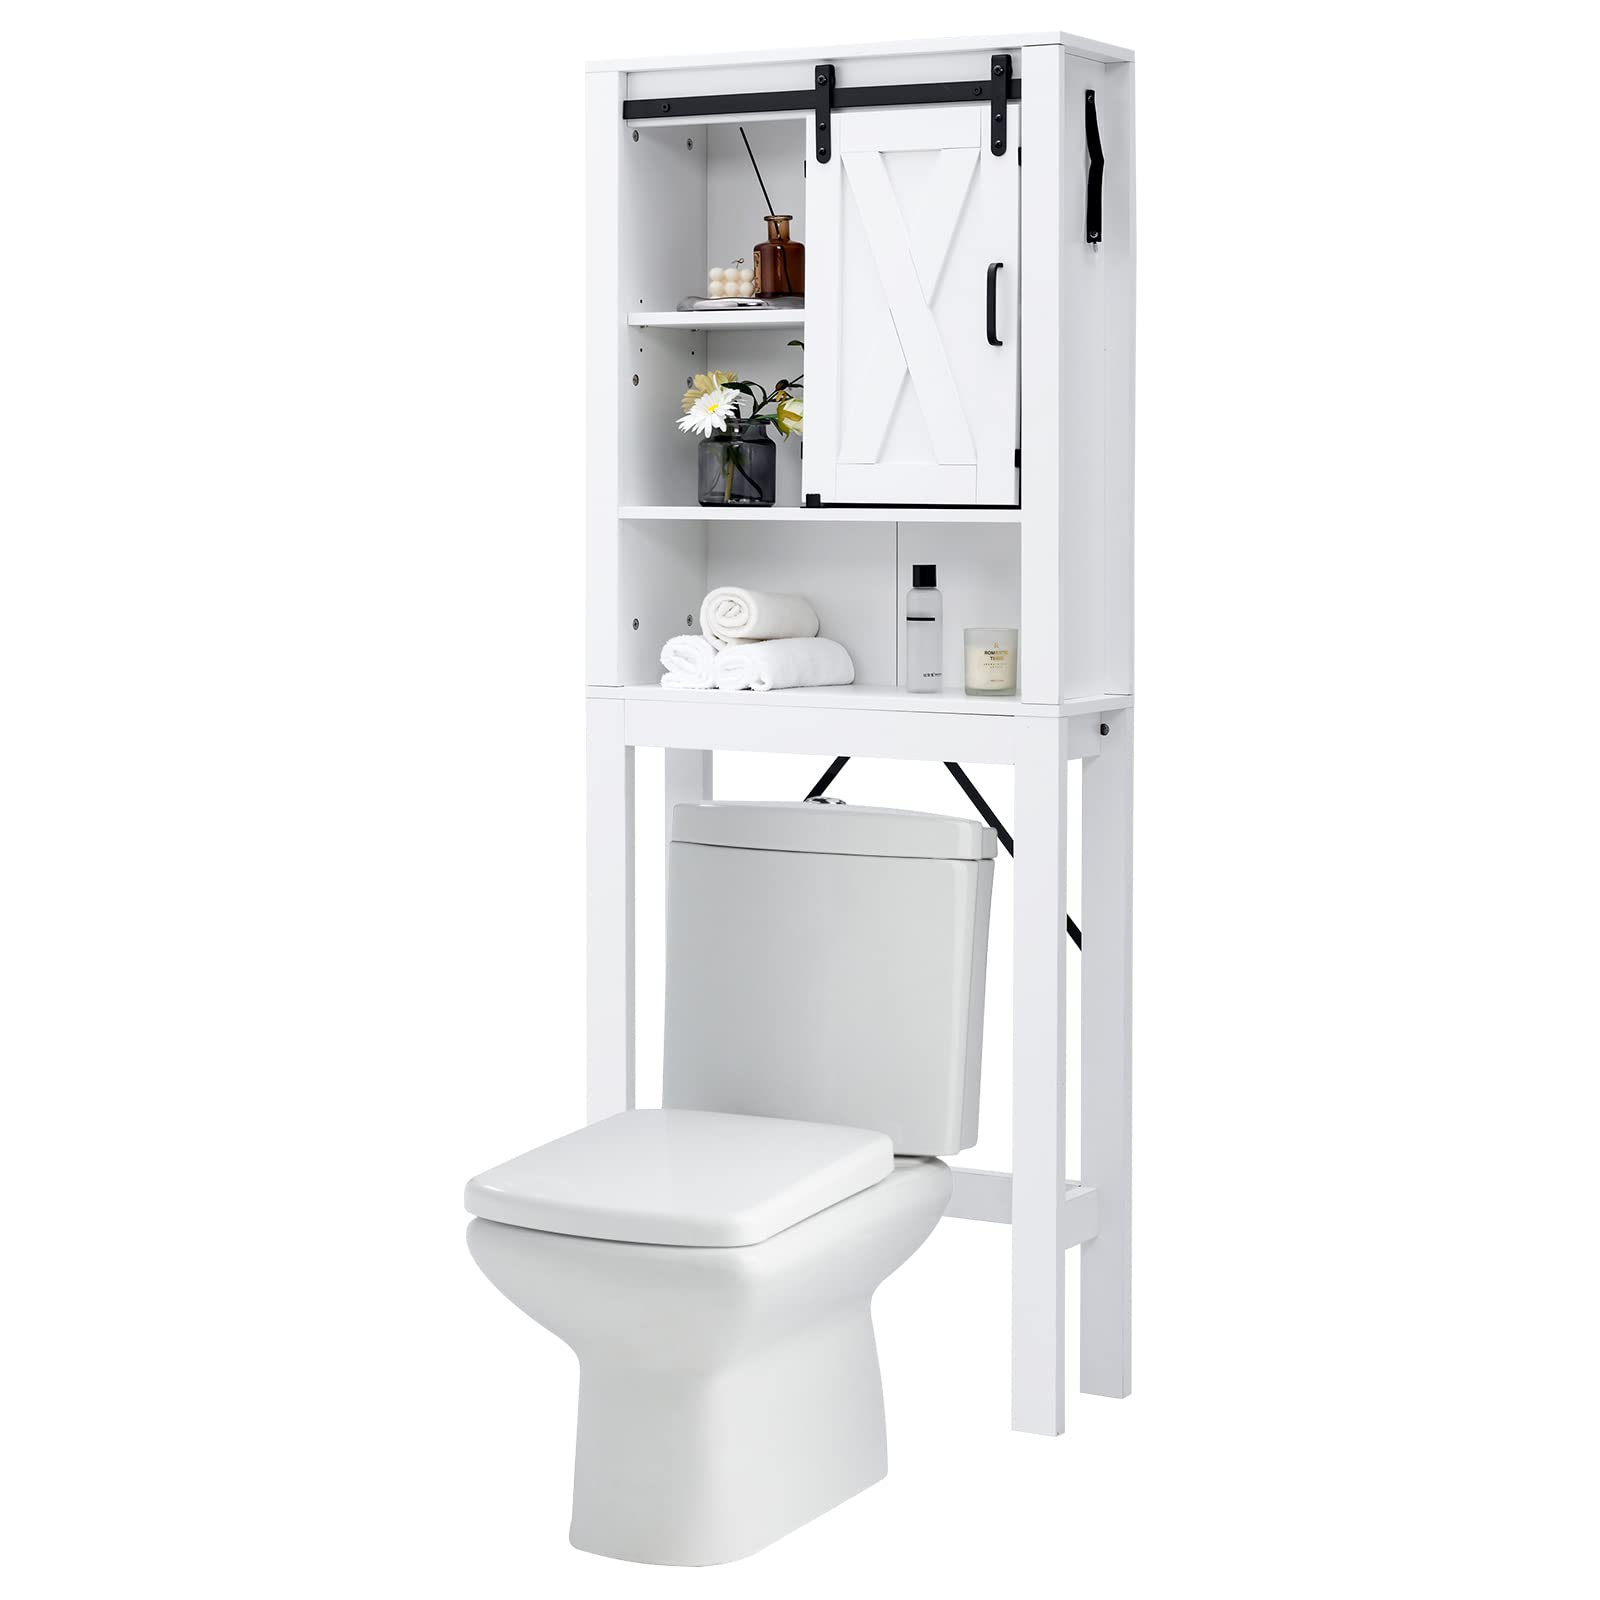 Giantex Over-The-Toilet Space Saver Cabinet